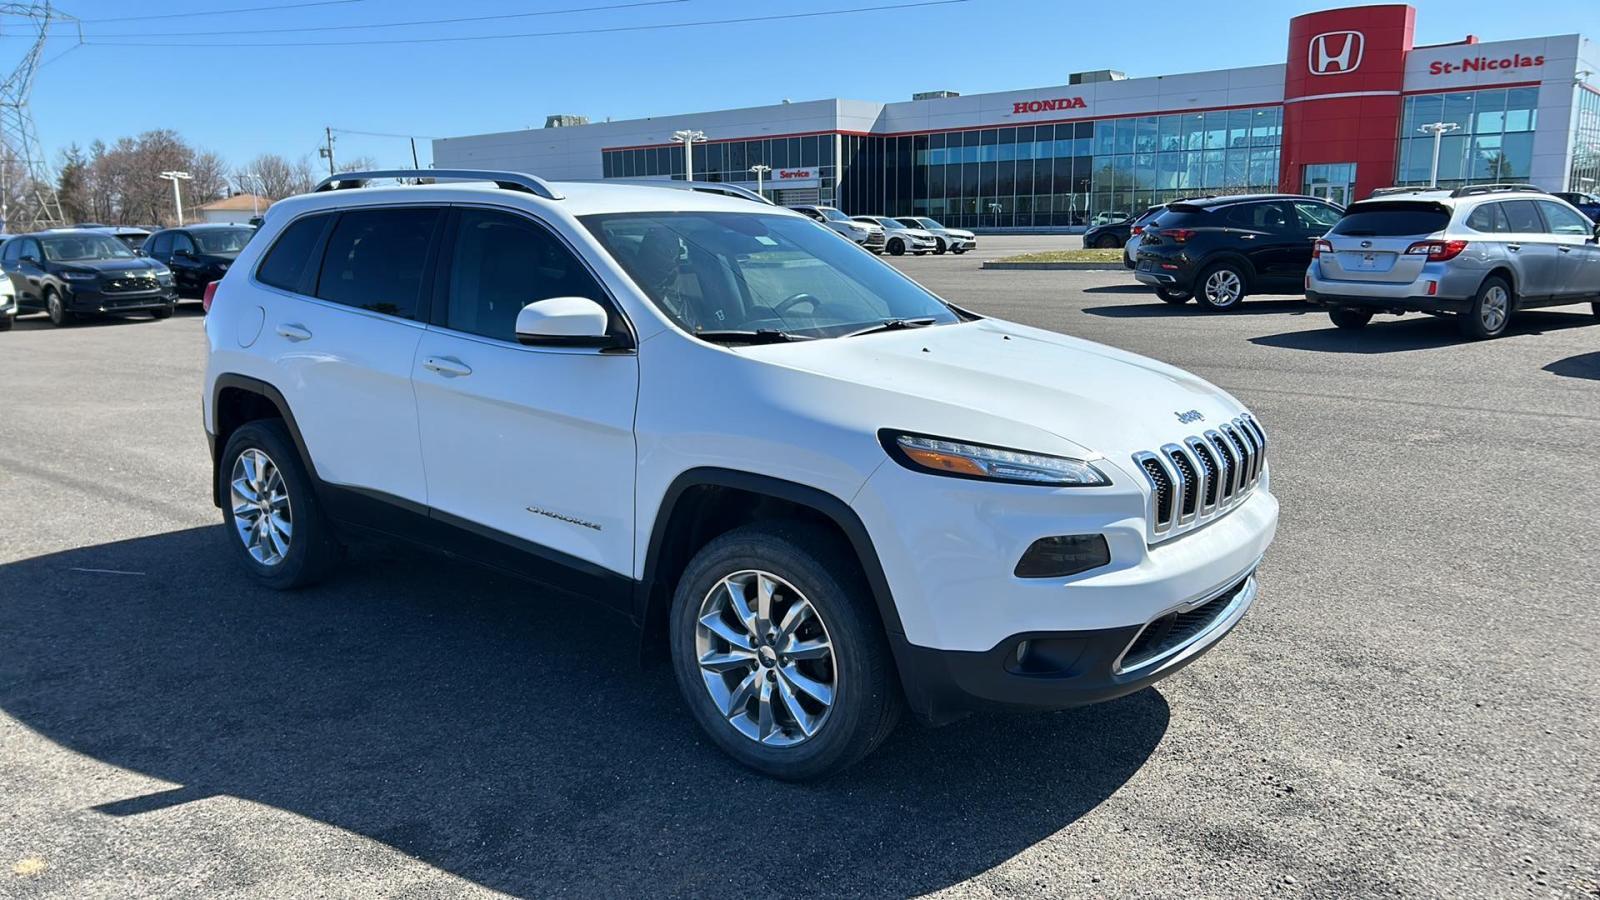 2017 Jeep Cherokee 4 RM, 4 portes, Limited